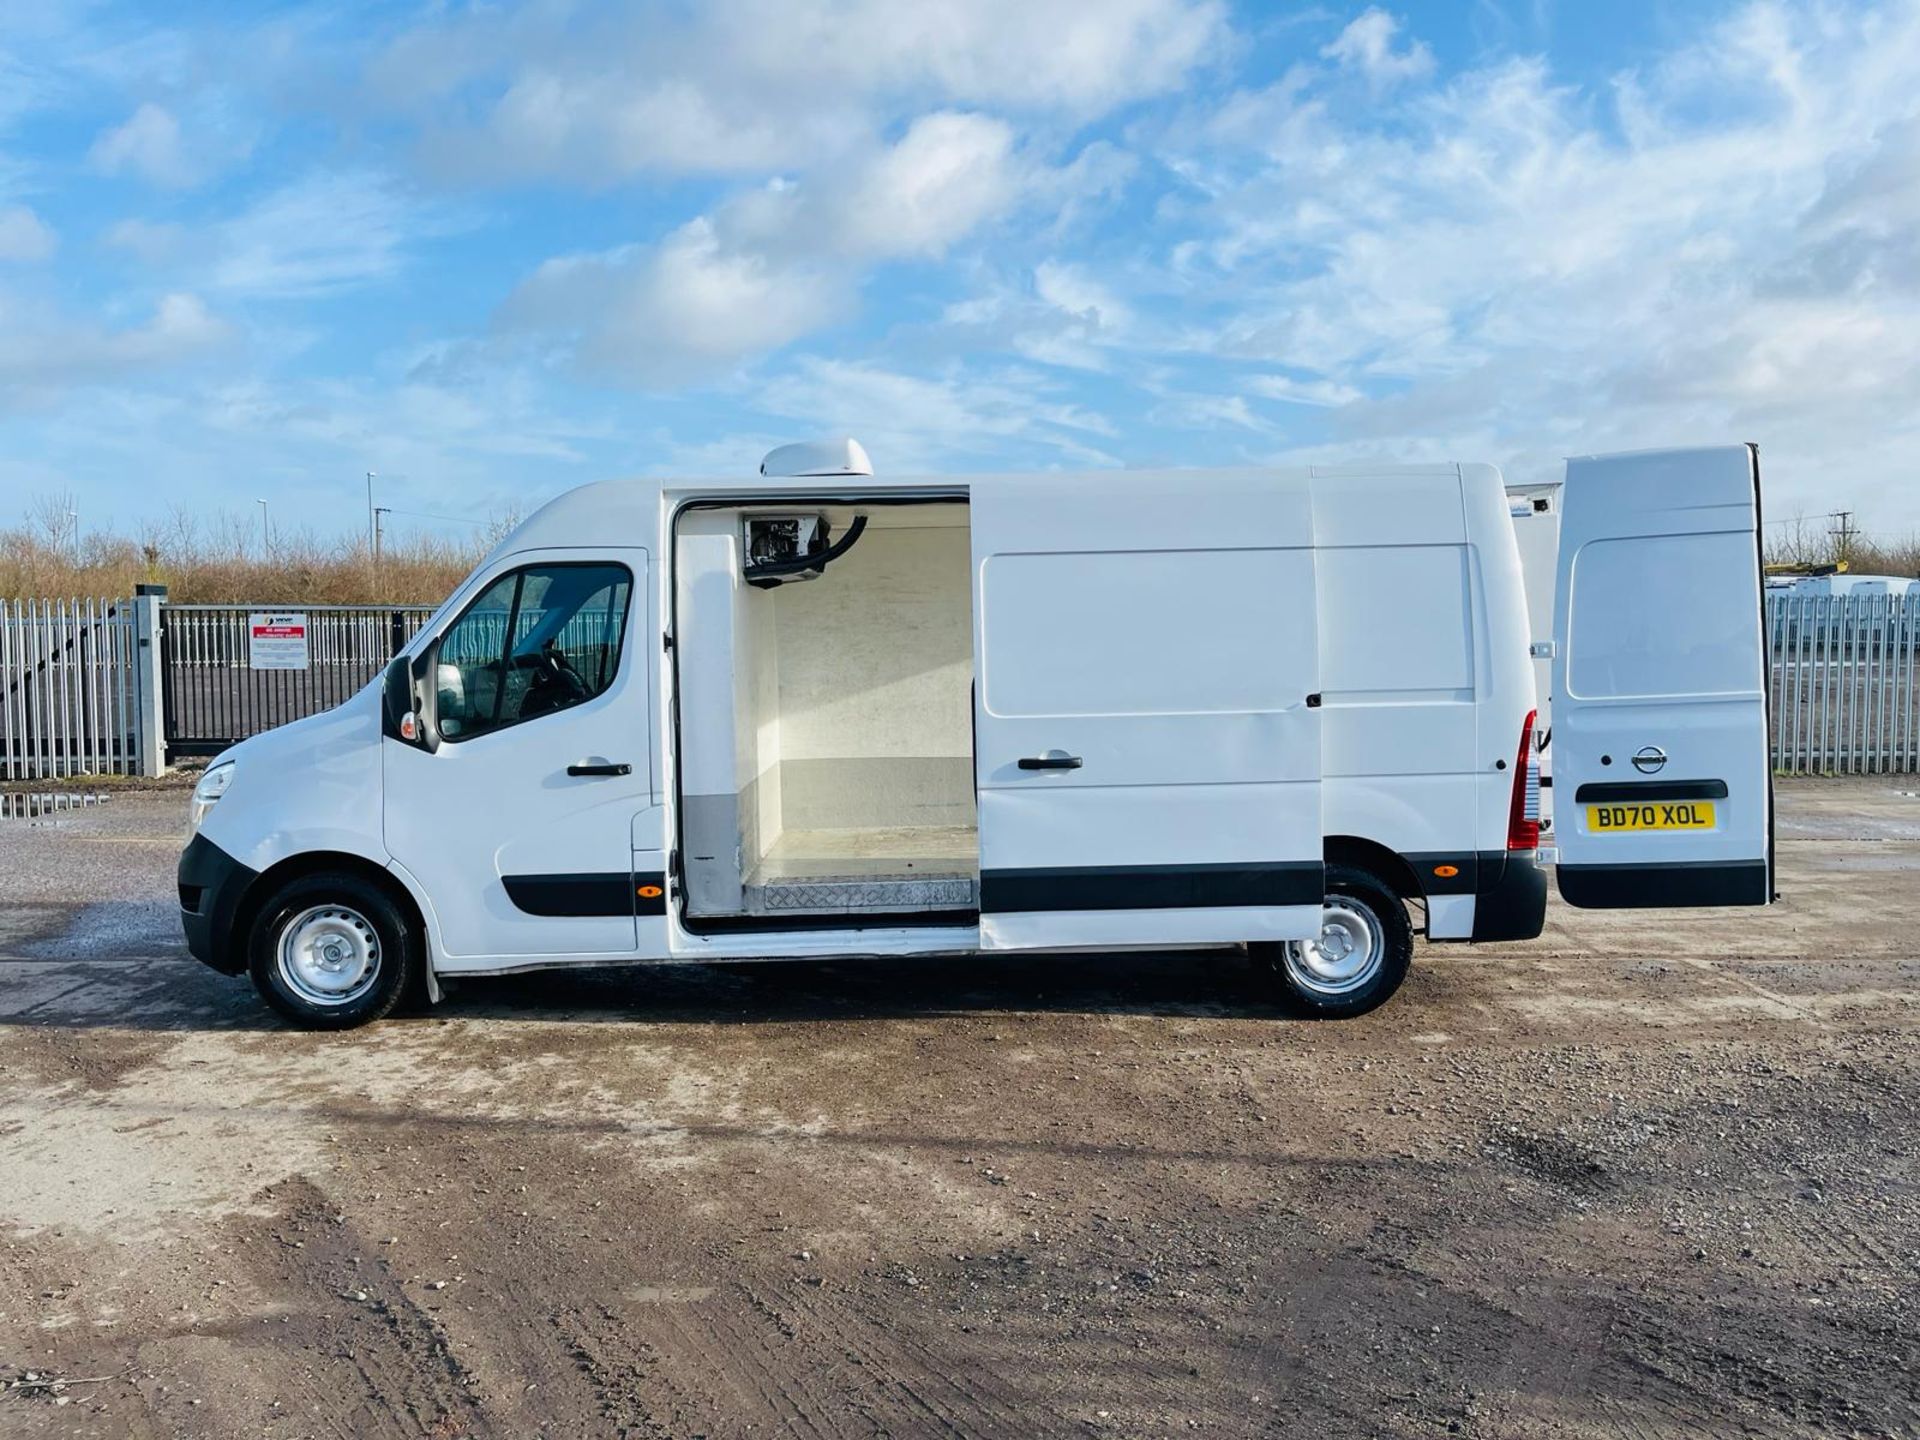 ** ON SALE ** Nissan NV400 Acenta Dci 135 F35- Refrigerated - Bluetooth Handsfree -ULEZ Compliant - Image 5 of 28